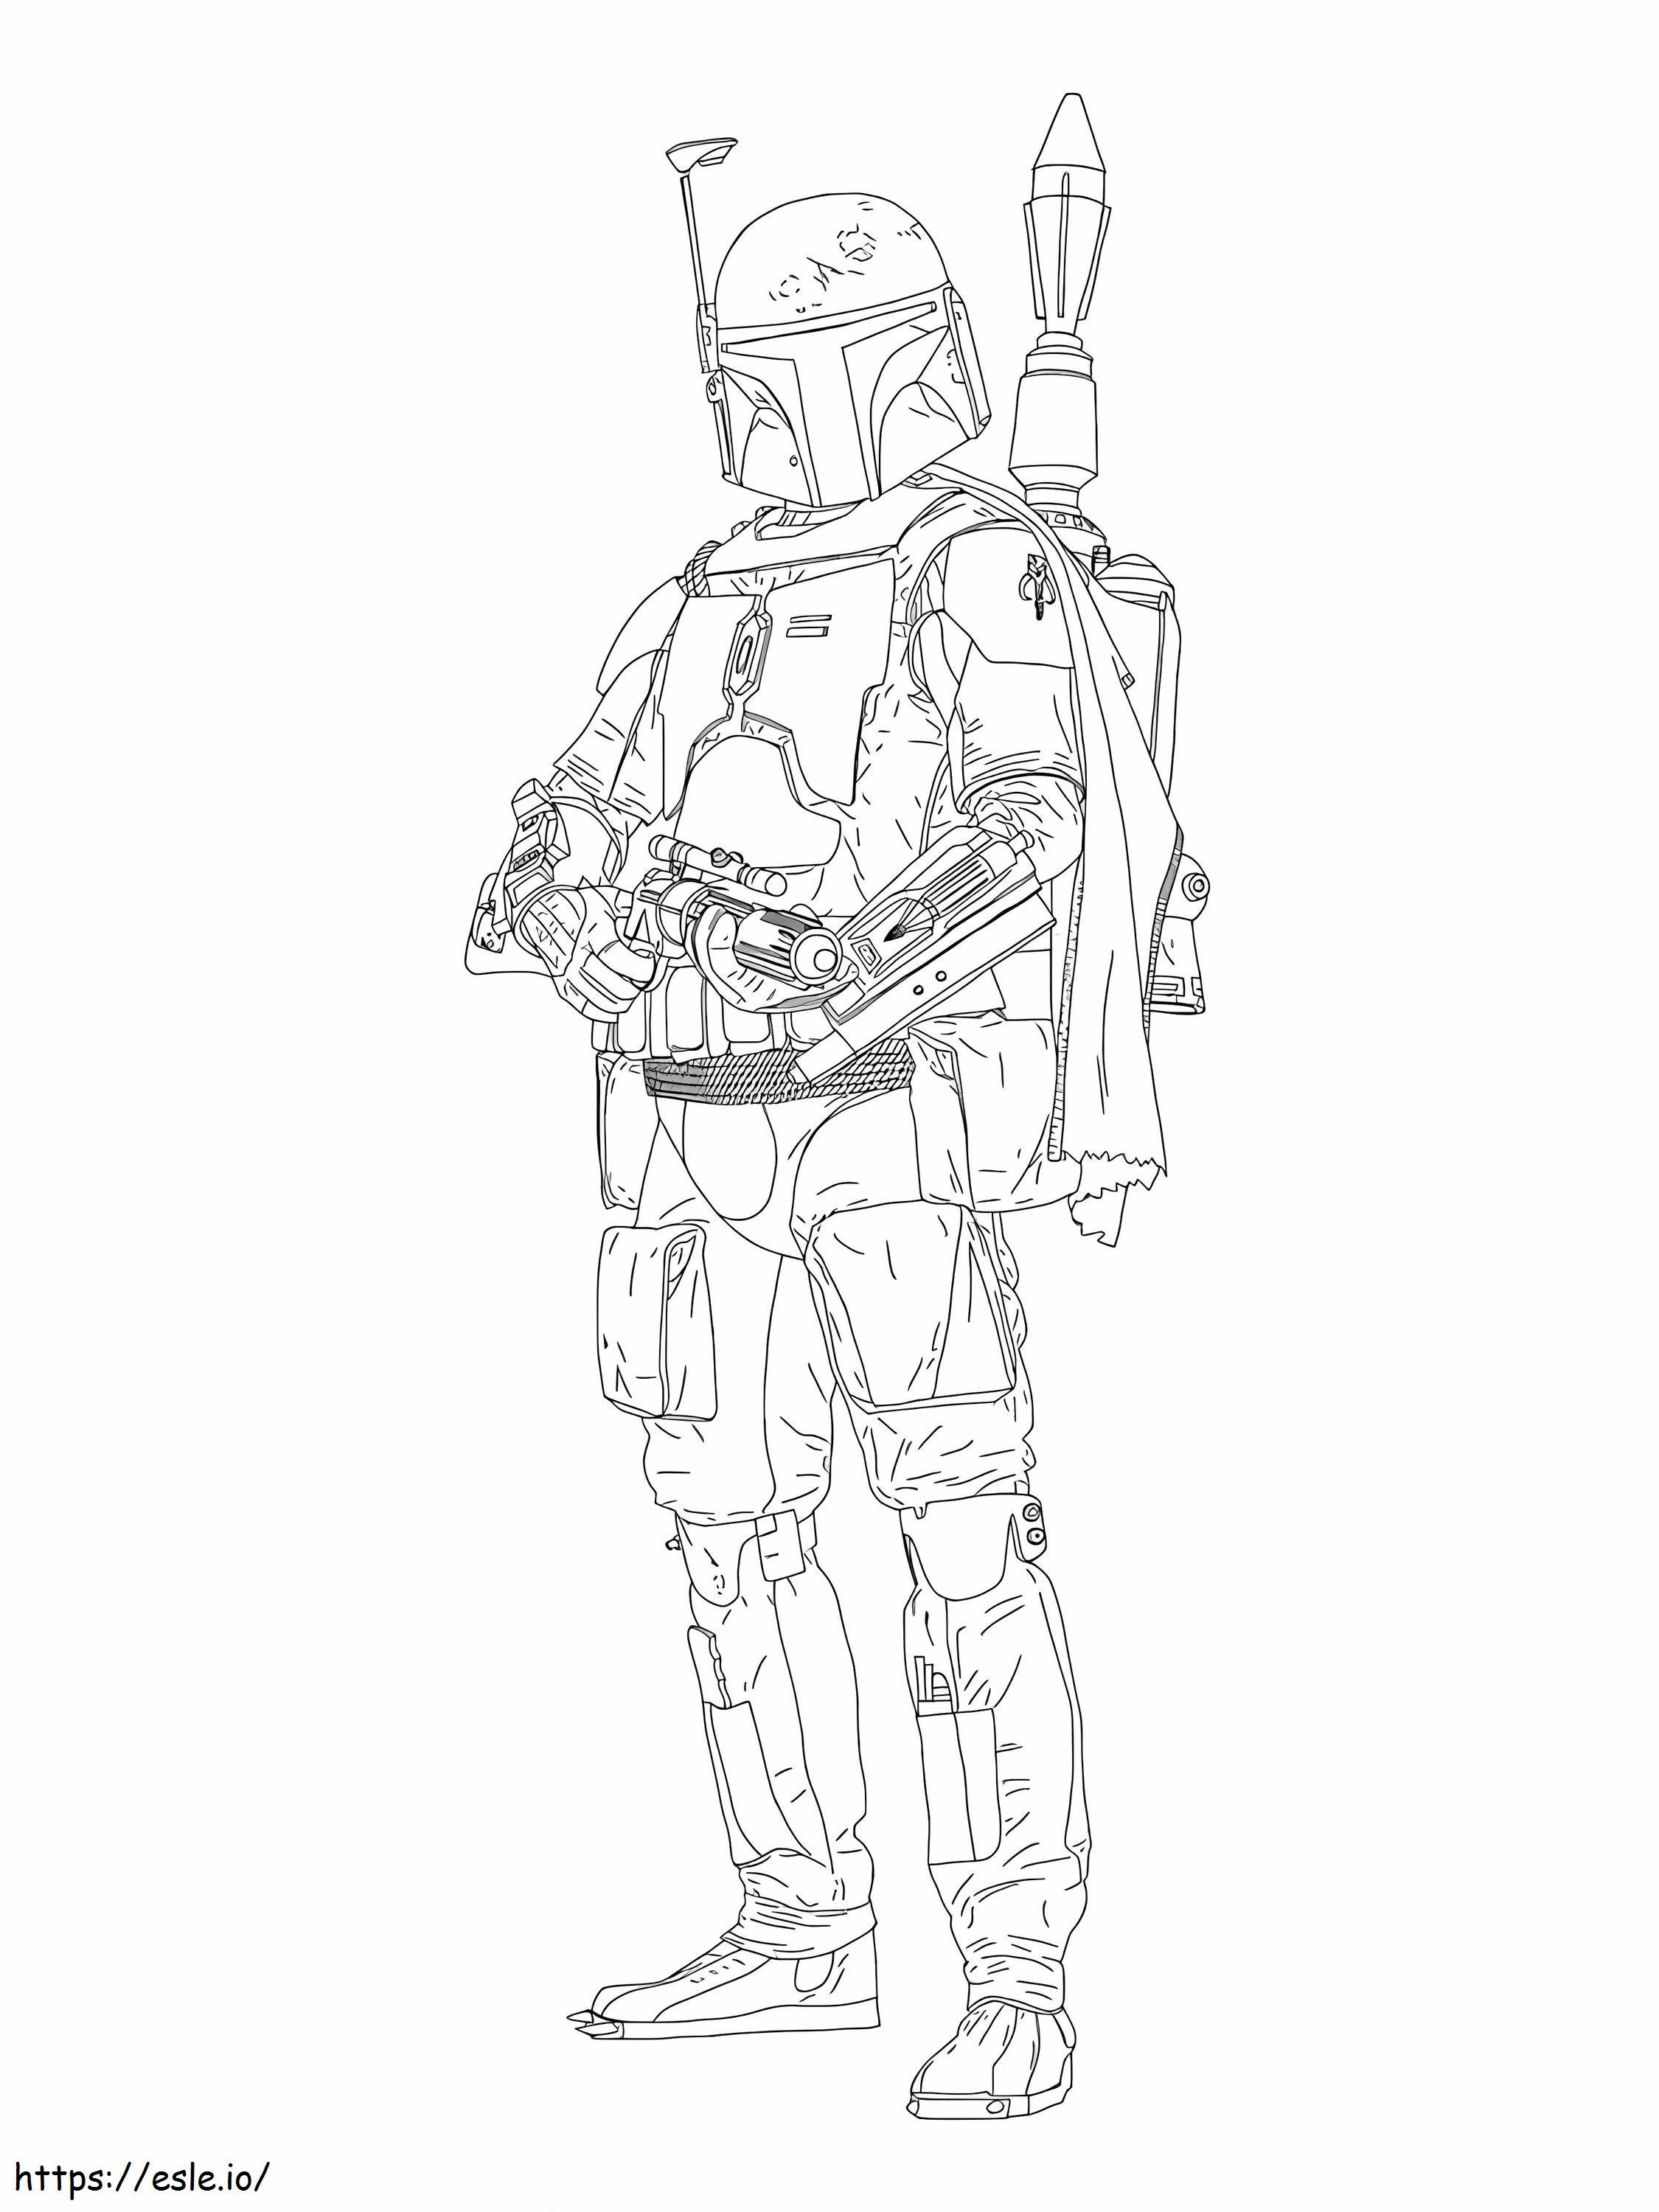 Boba Fett 3 coloring page